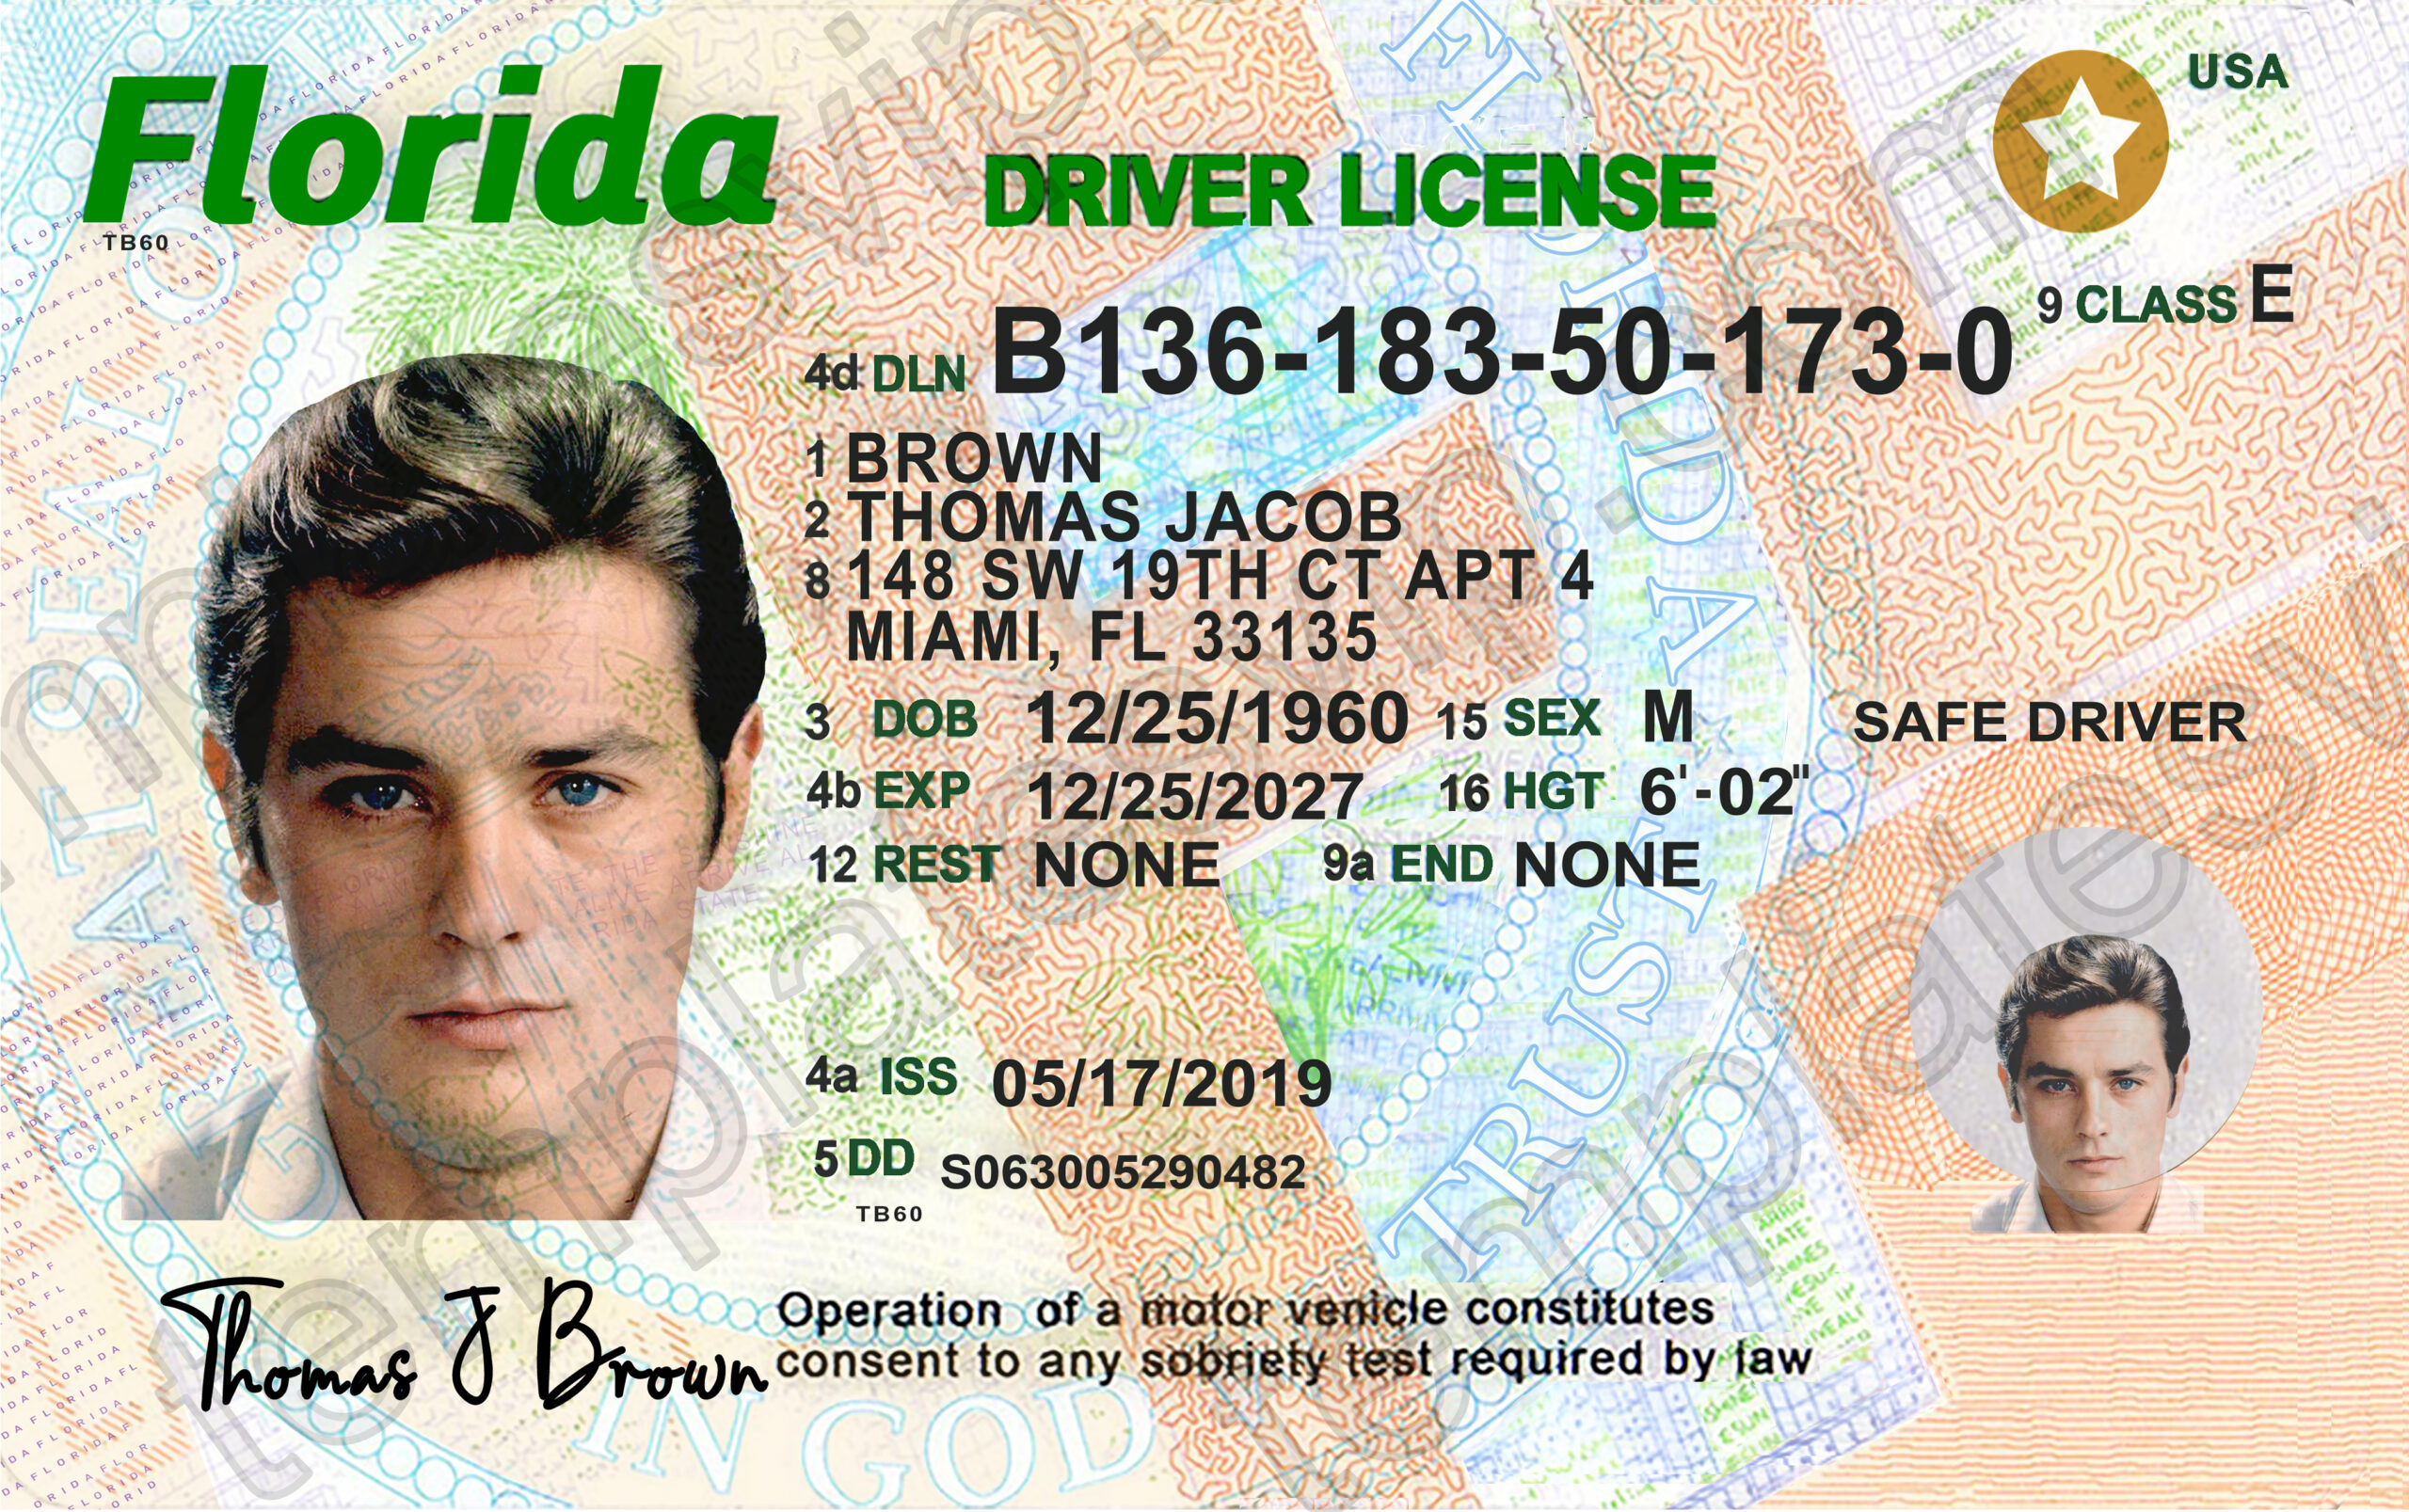 Florida (FL) NEW Driver’s License PSD Template Download 2021